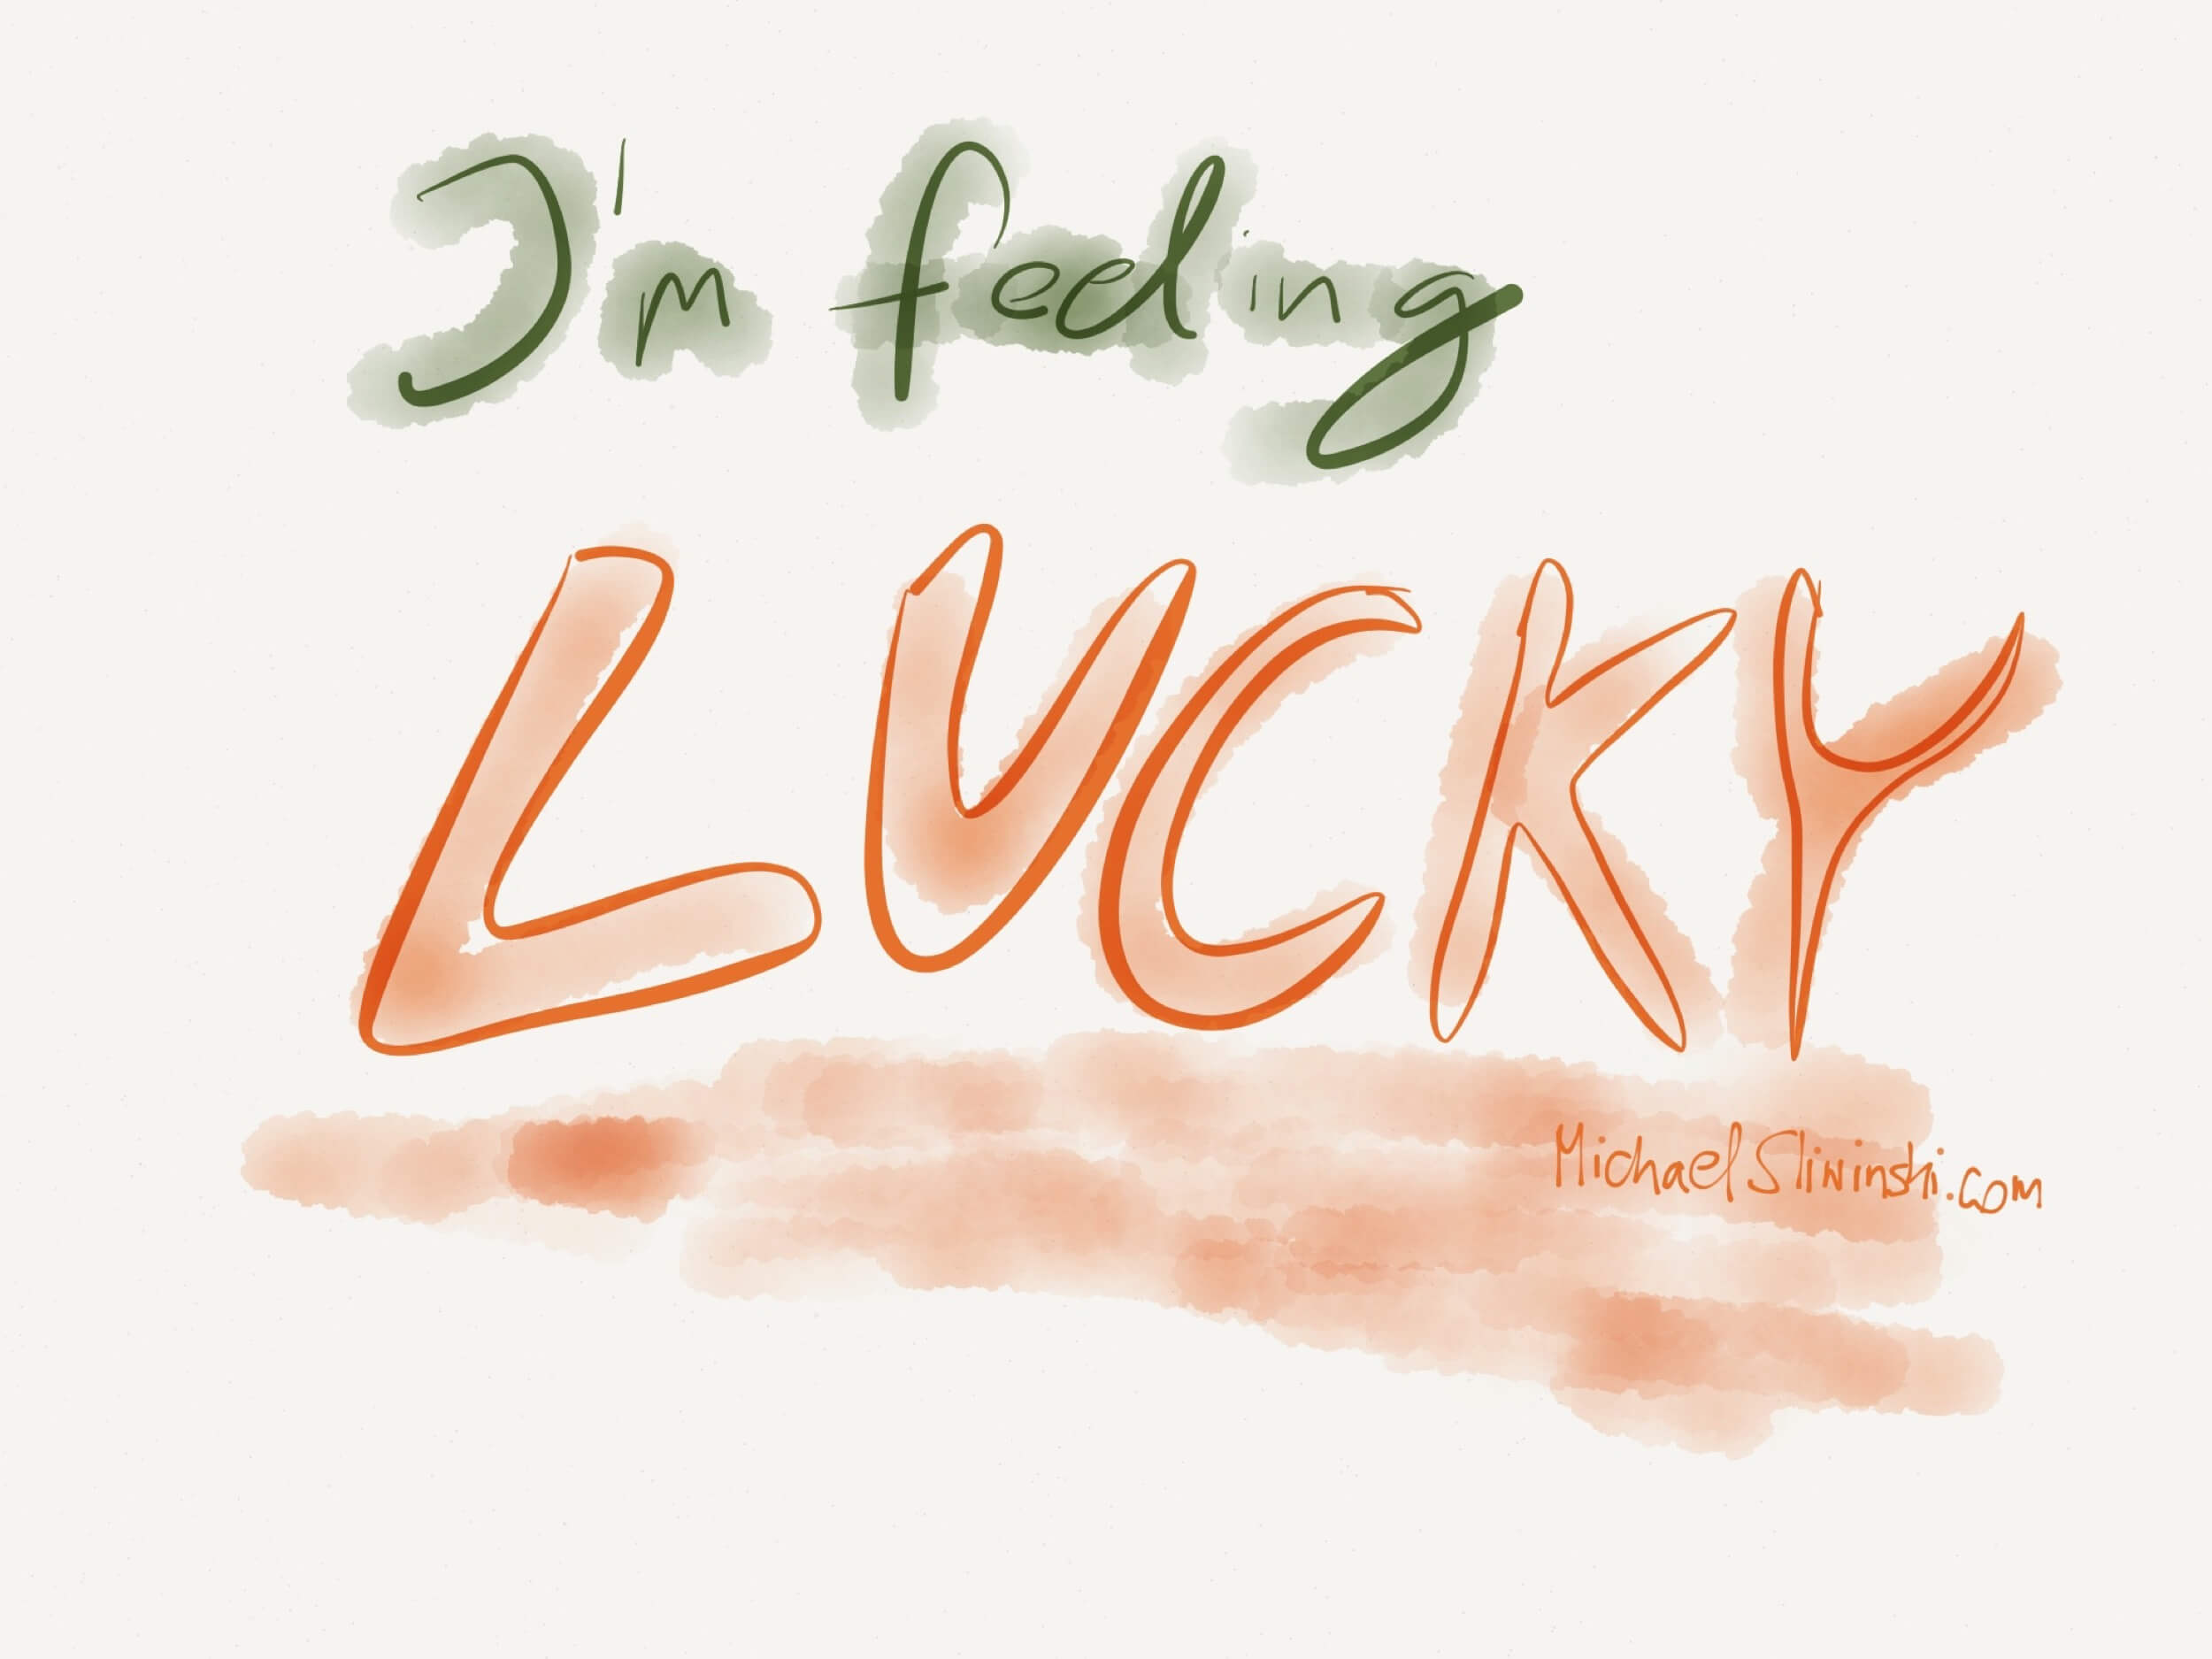 Luck is what ultimately matters… but you can help it!